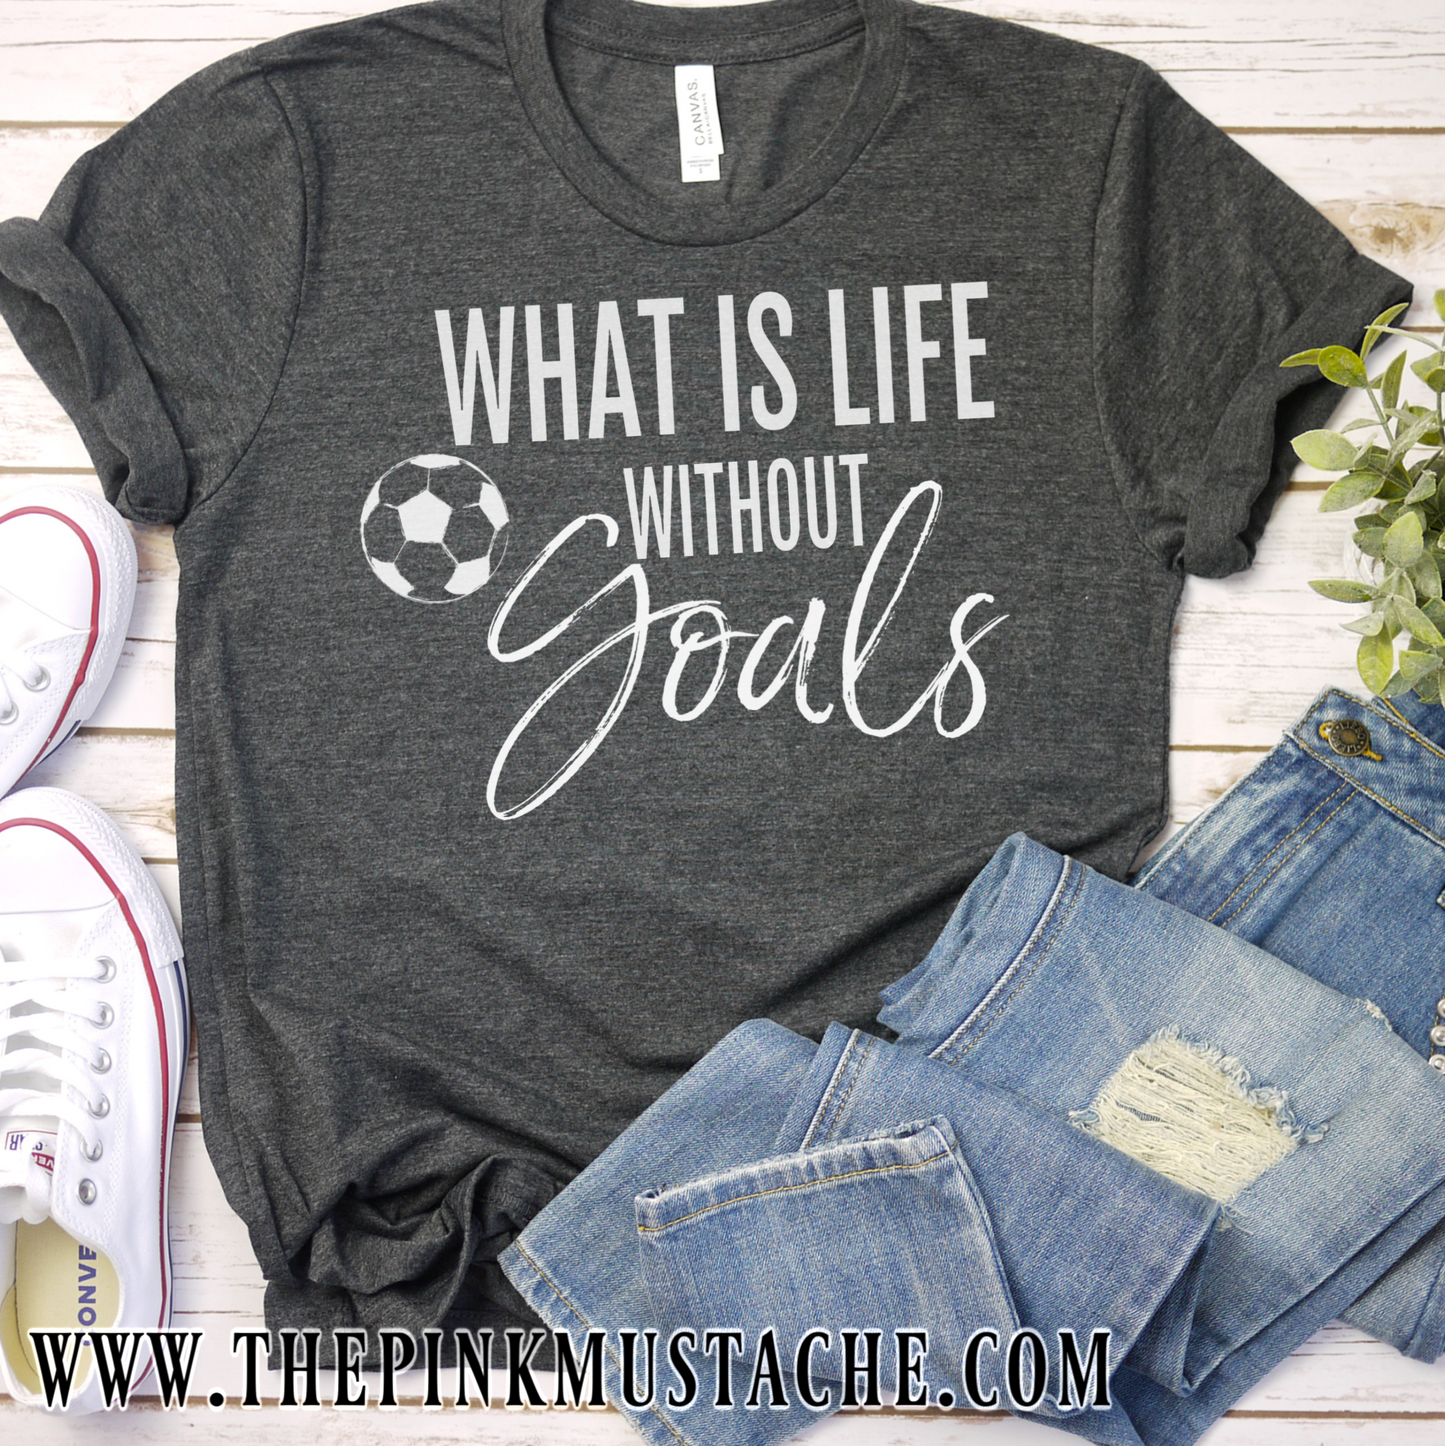 Soccer - What Is Life Without Goals - Shirt - Soccer Mom Shirt